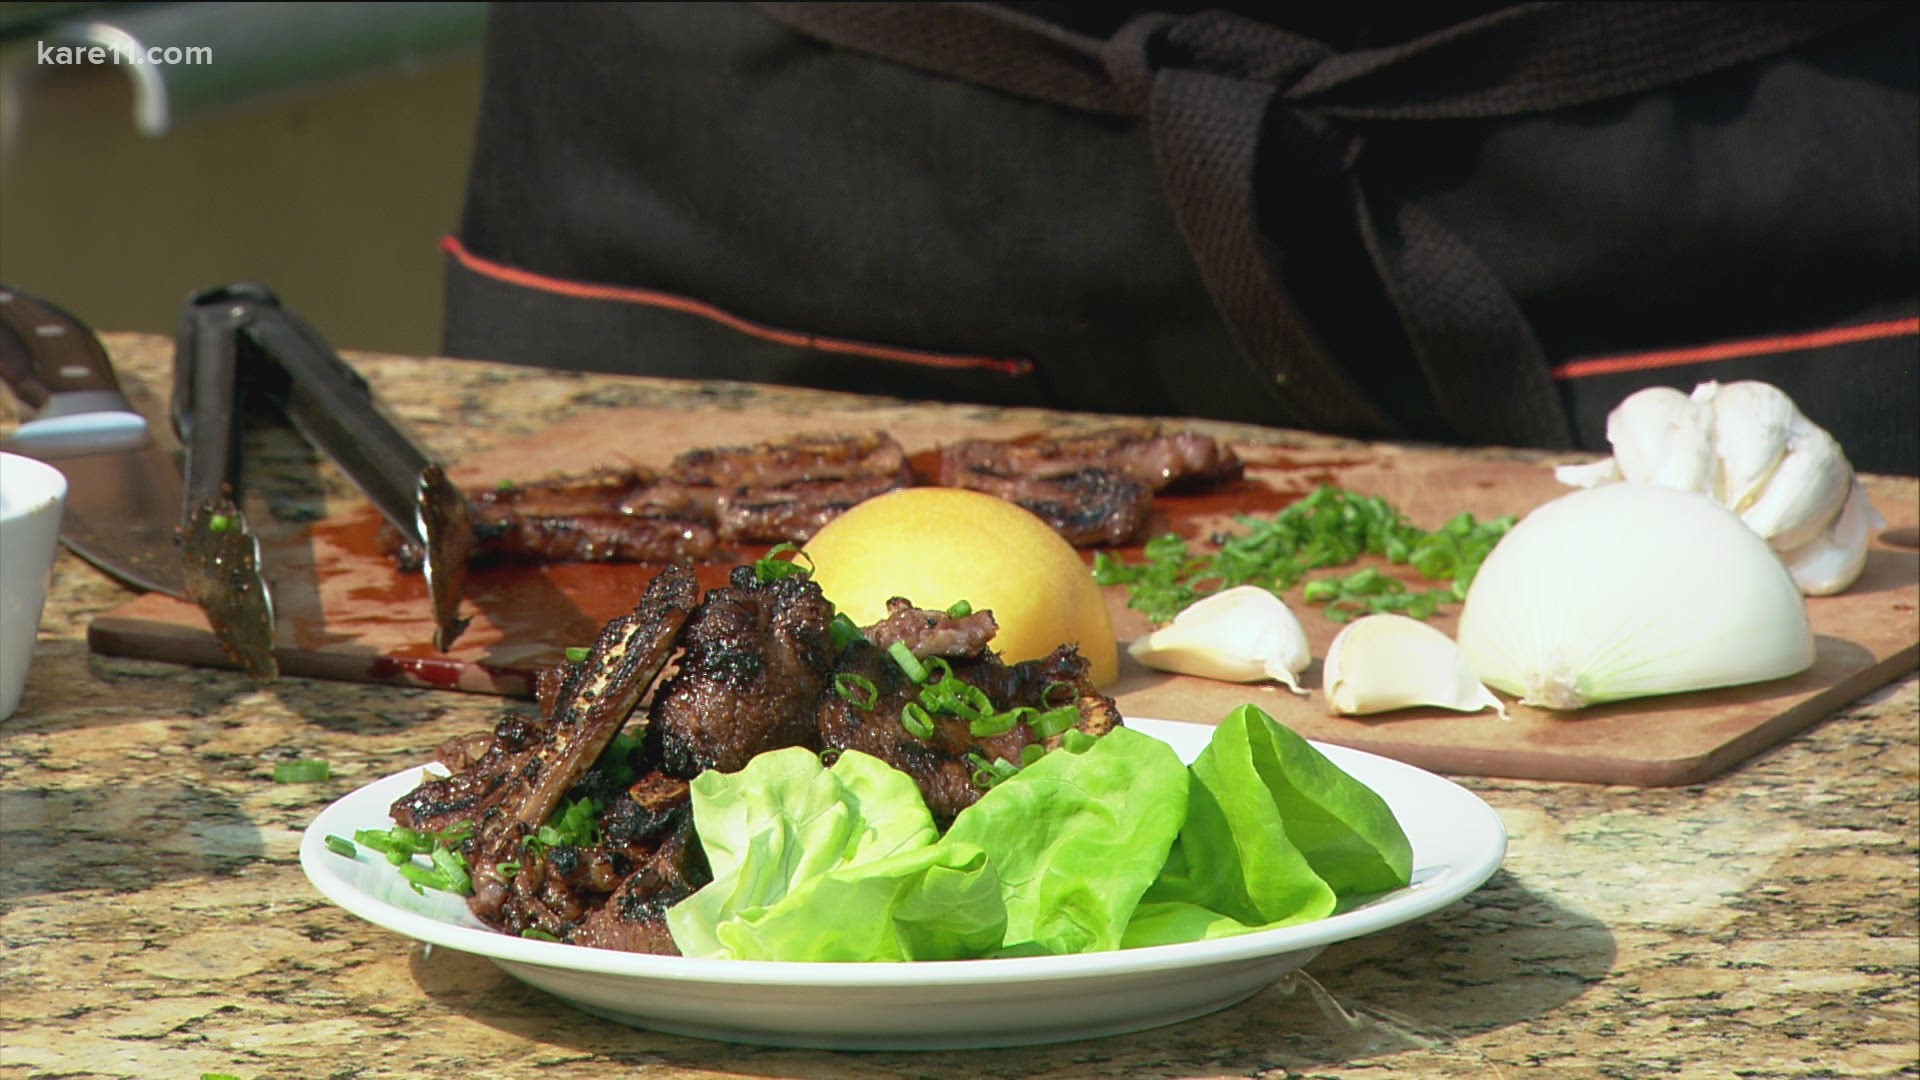 Karl Benson from Cooks of Crocus Hill shared this delicious meal idea for the grill.